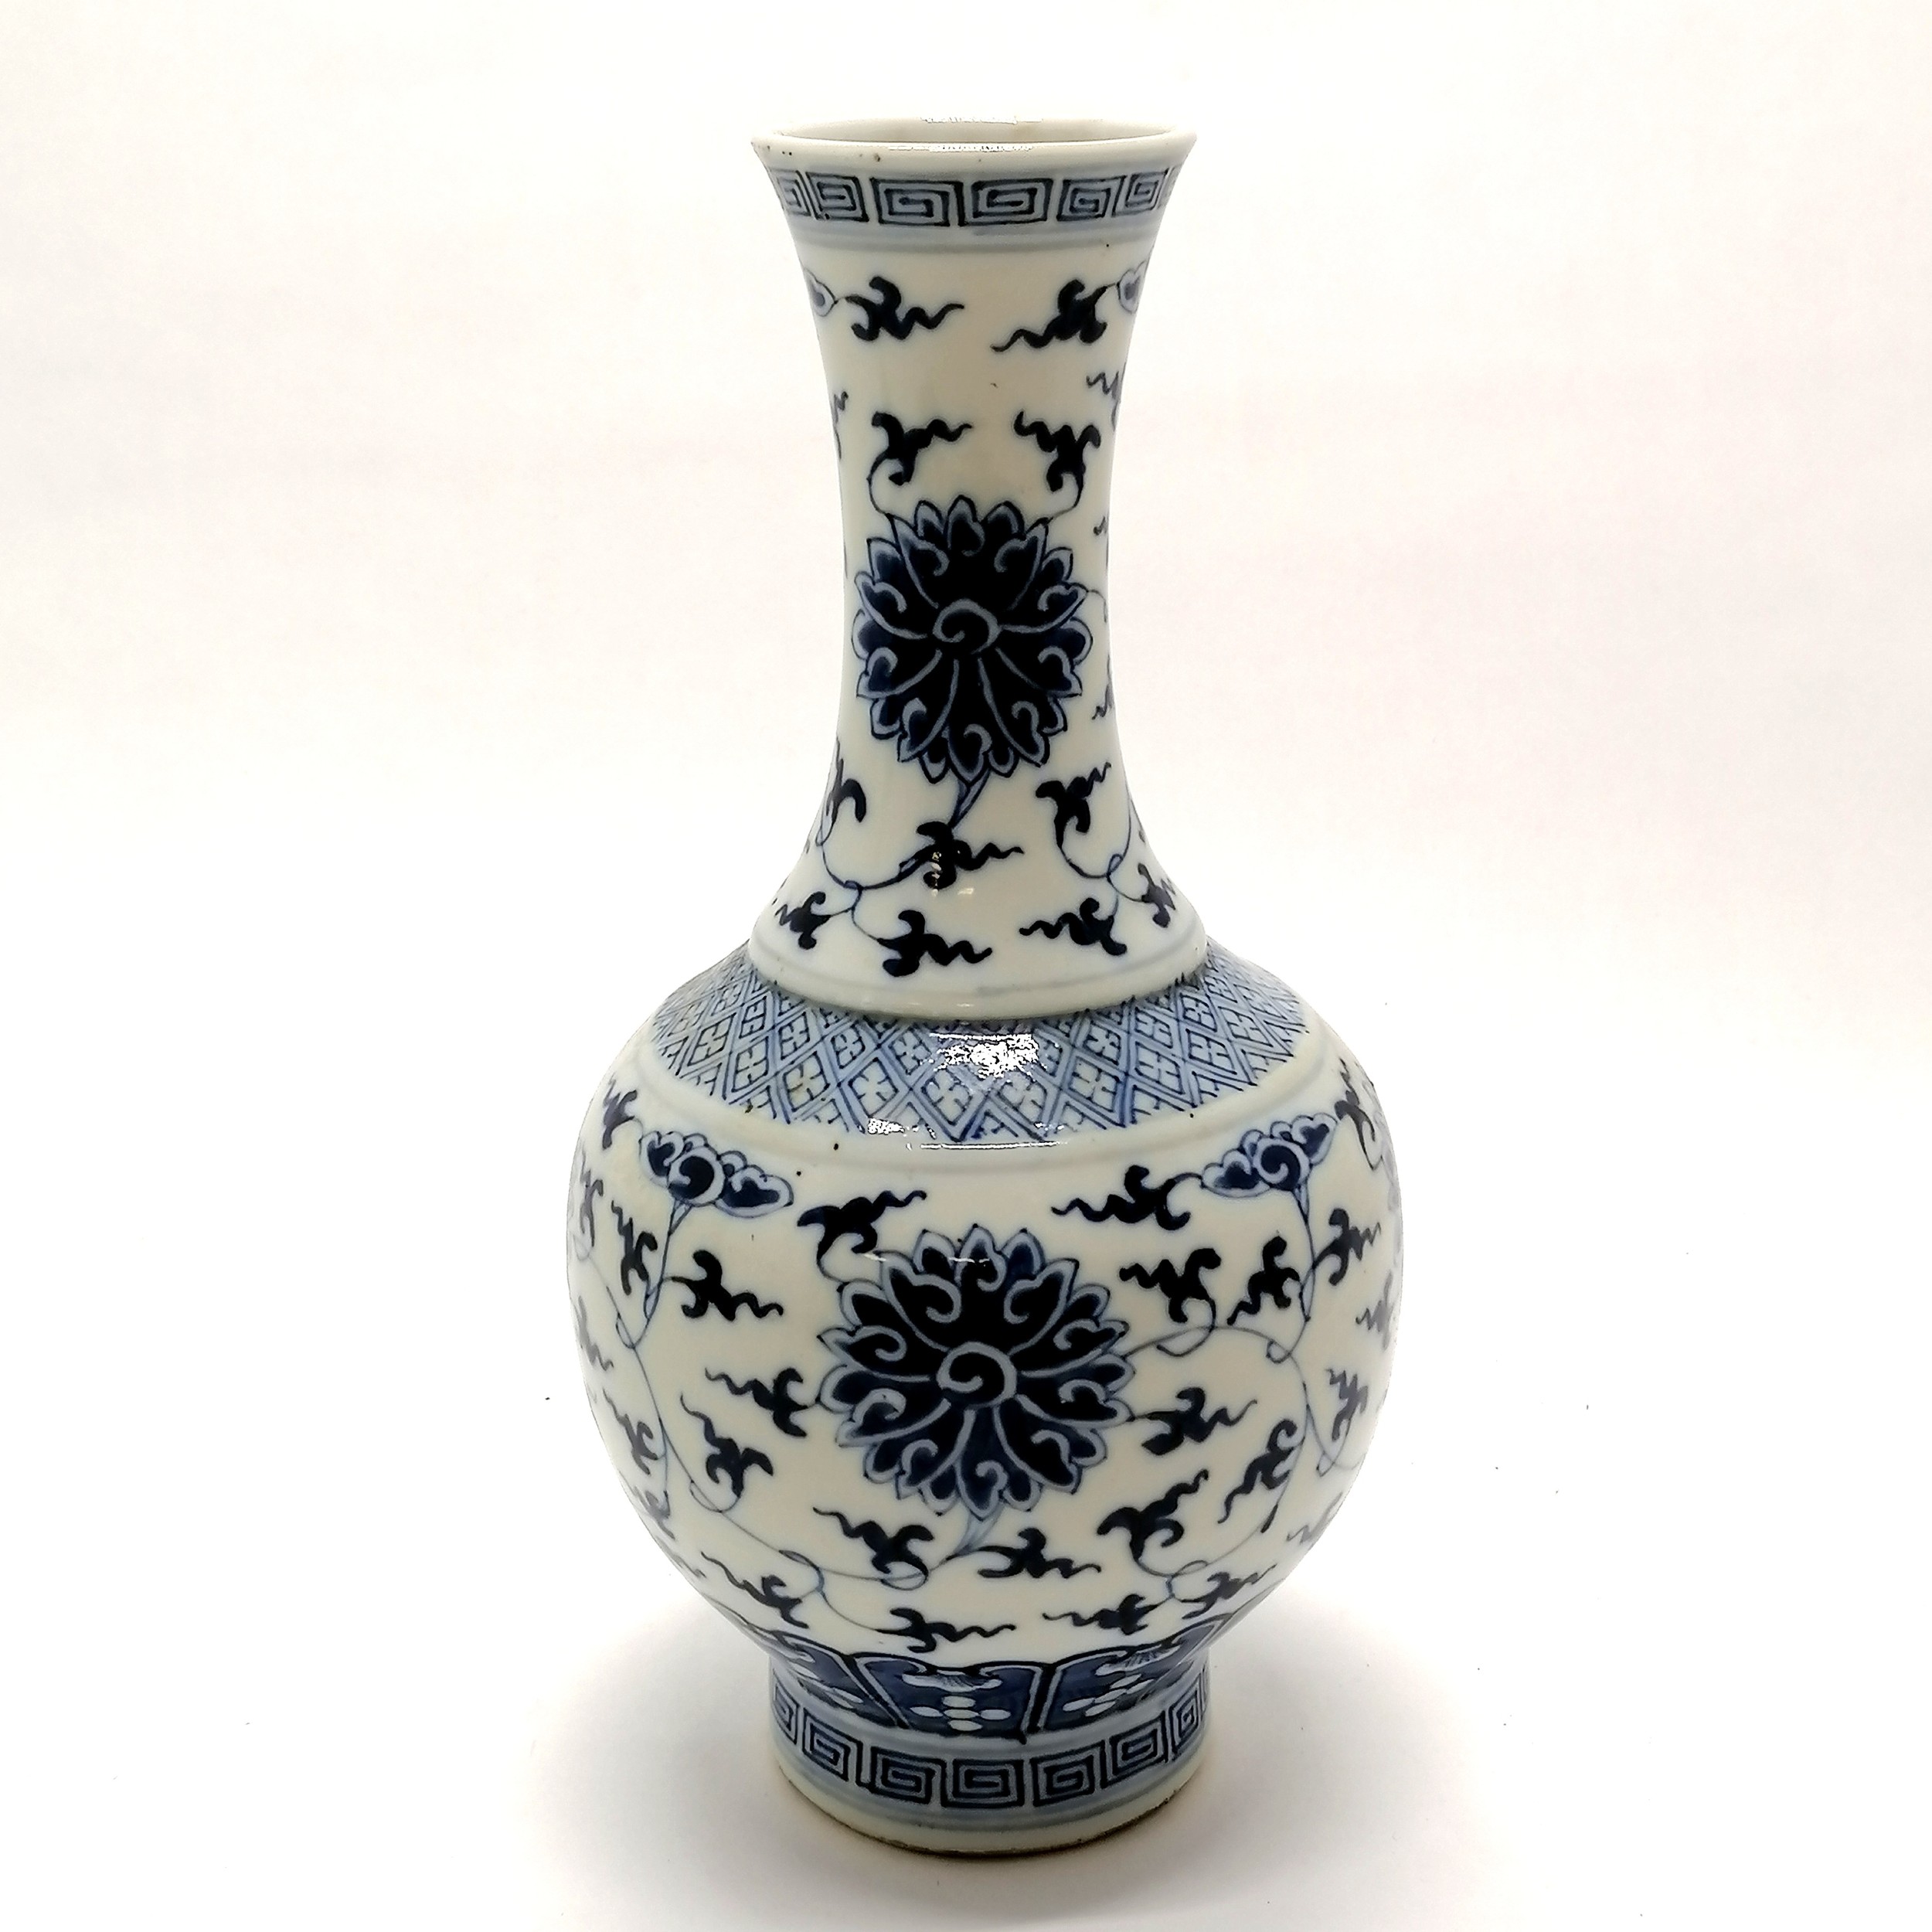 Antique Qianlong Chinese blue and white vase with flower decoration and 4 character mark (of the